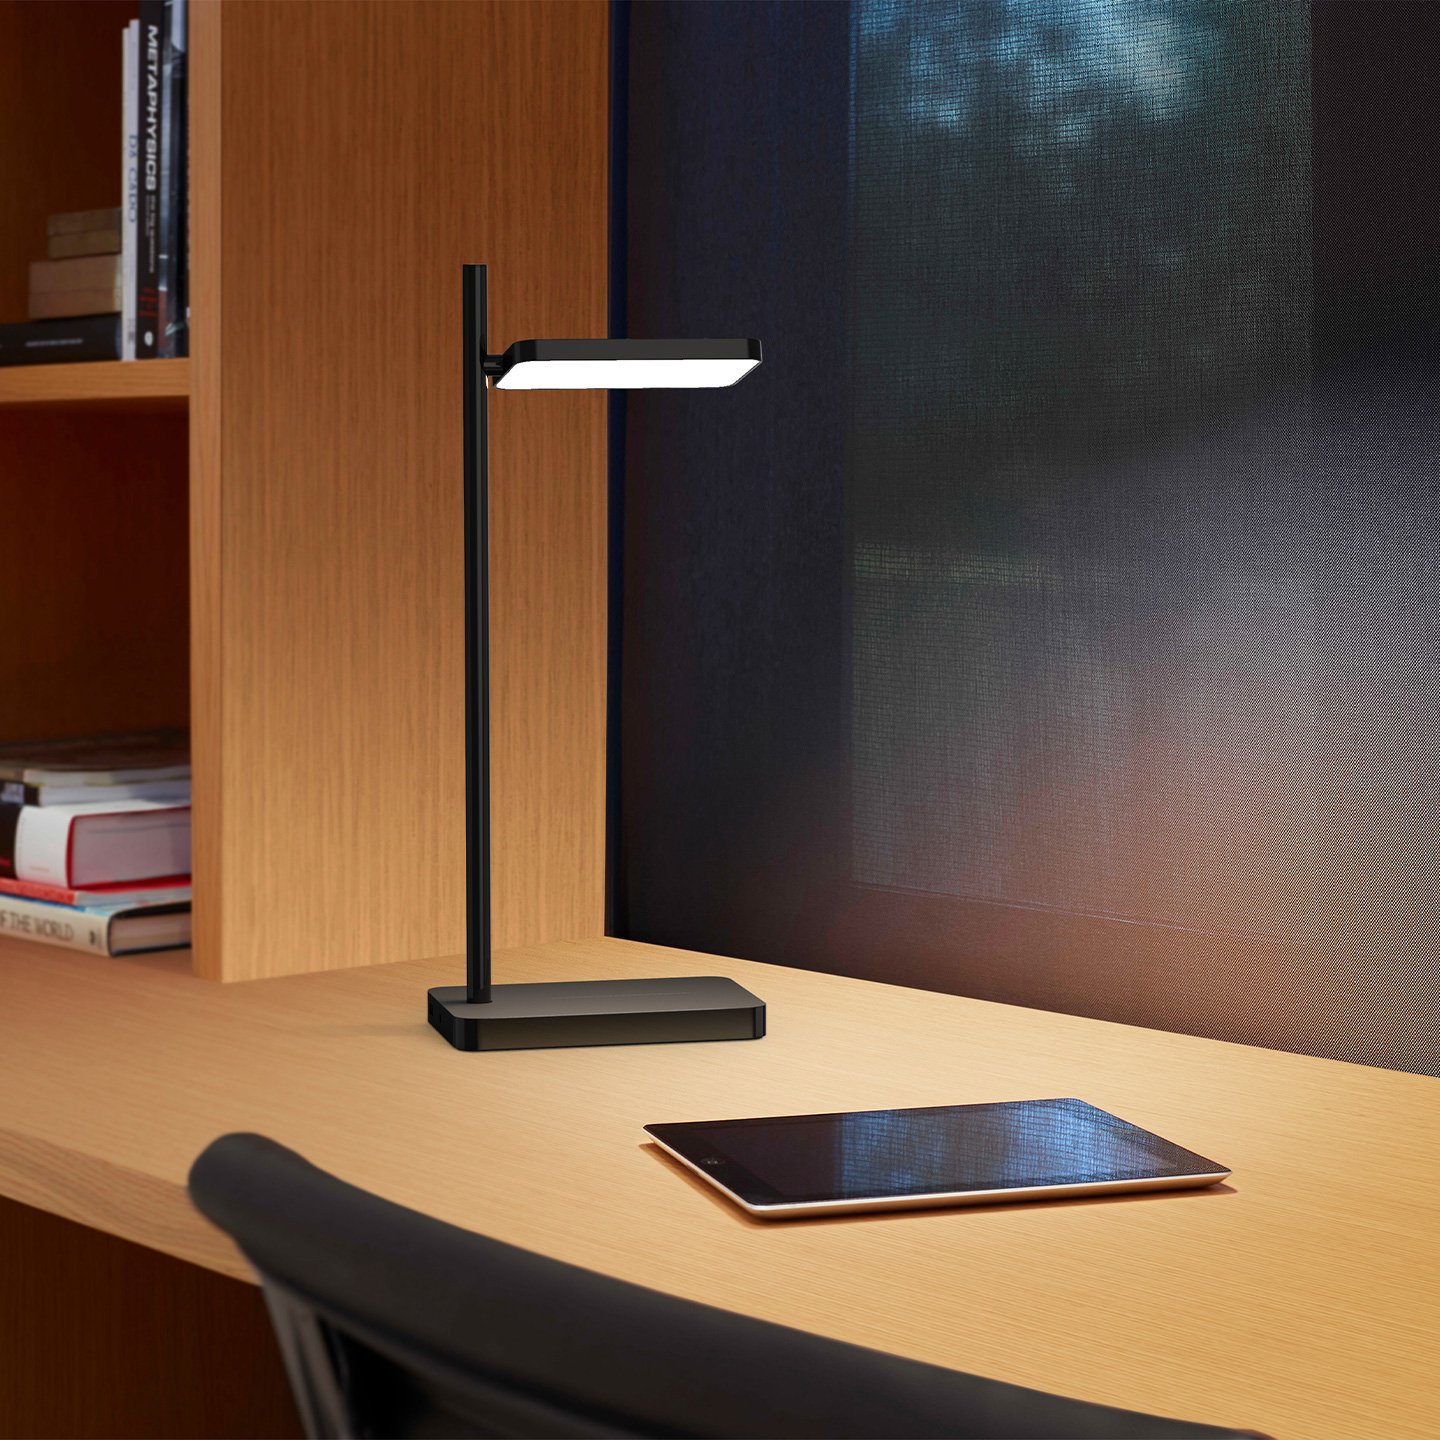 The clean design of the Talia lamp only encompasses the essential elements of its lighting purpose.